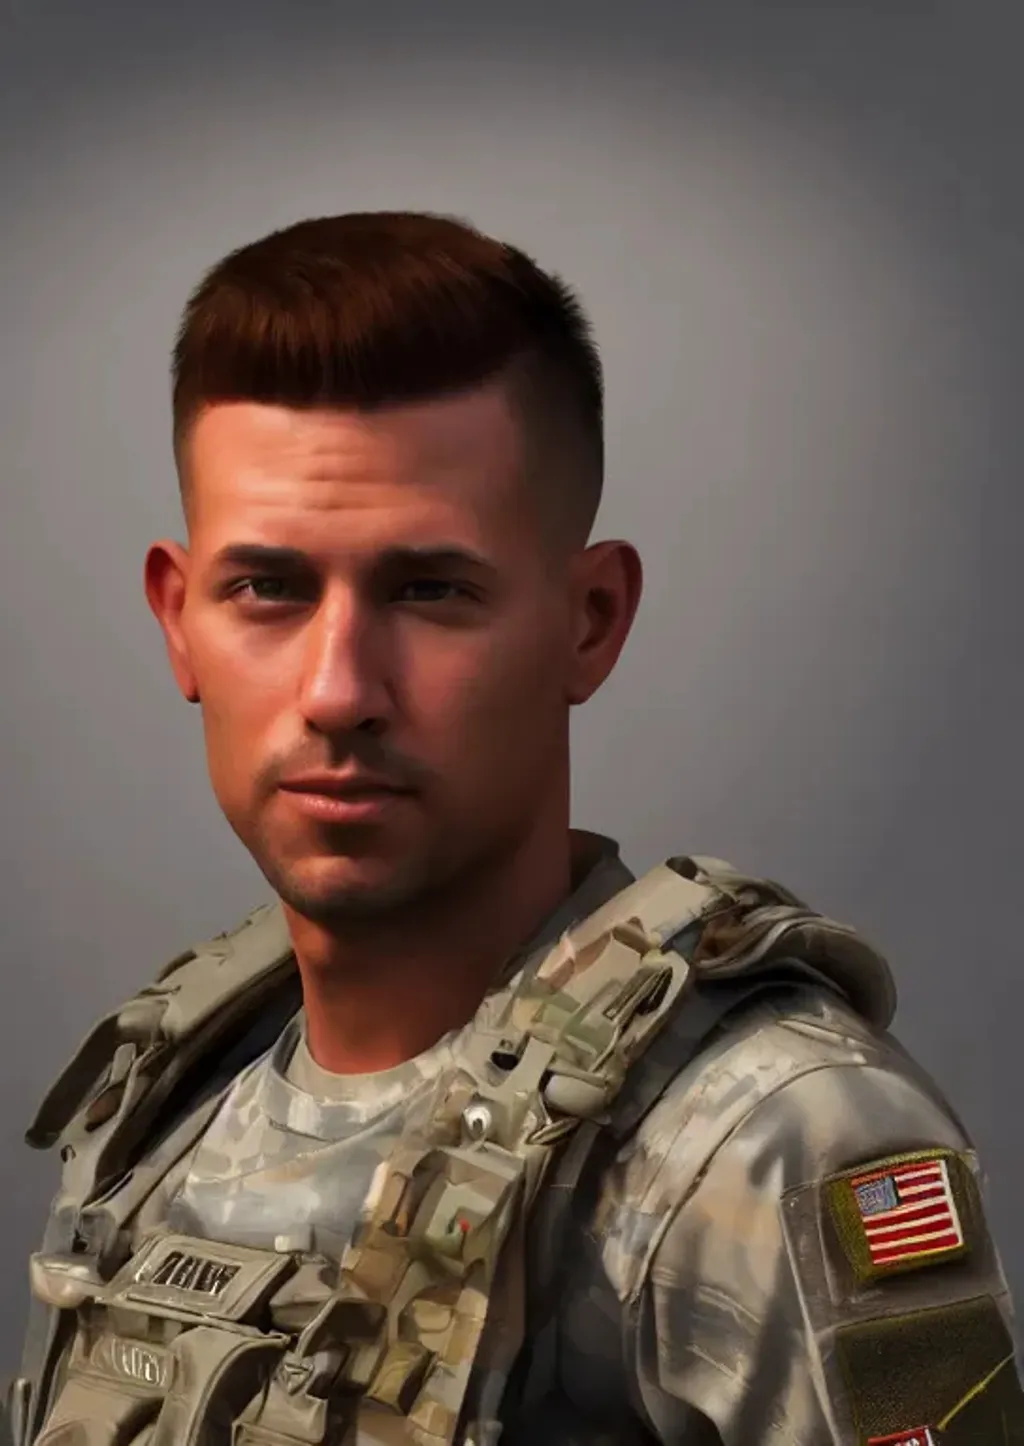 Here Are 10 Pictures of Men's Military Haircuts